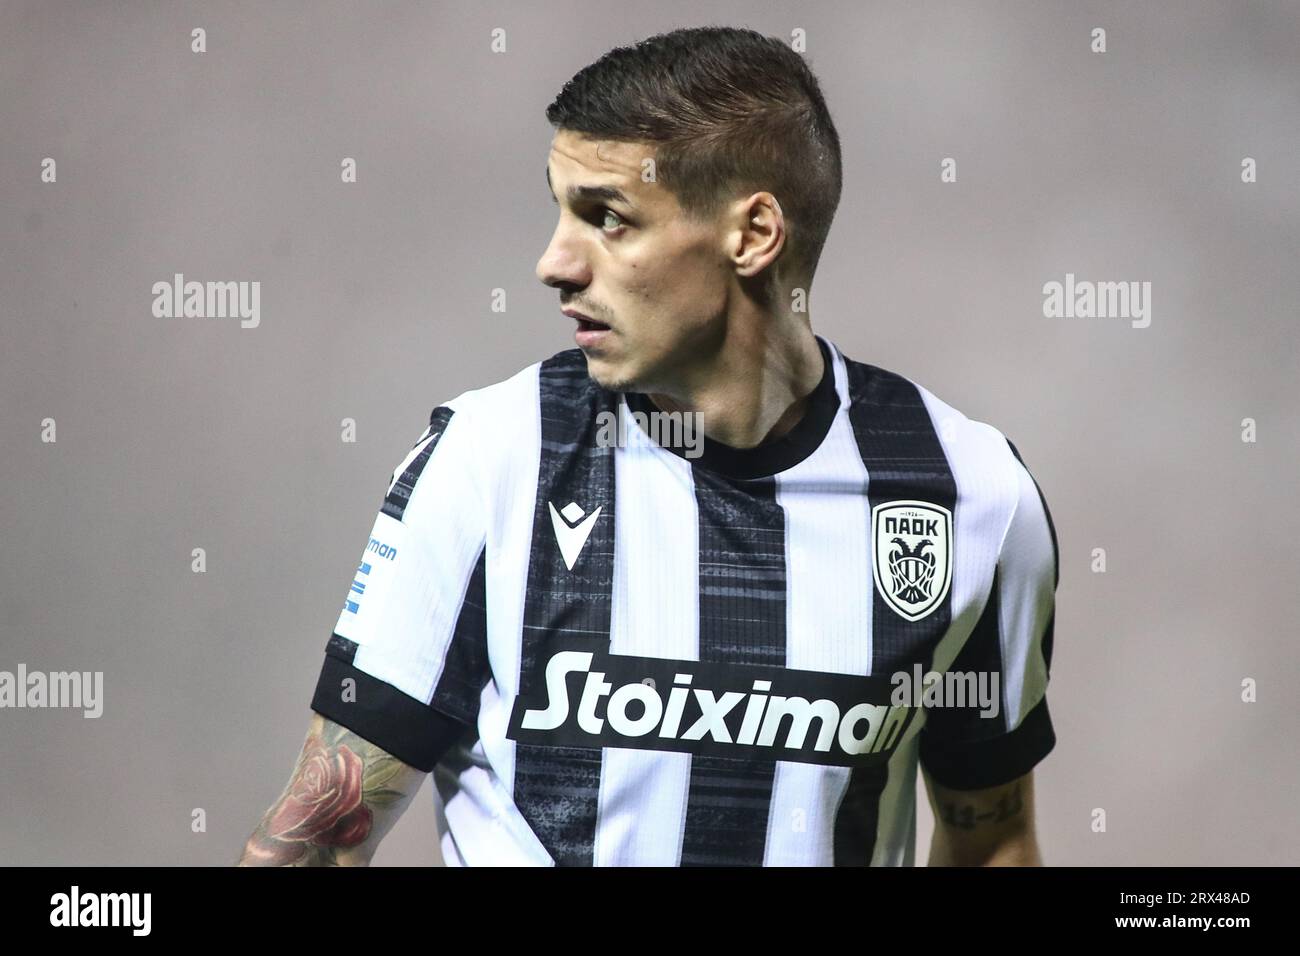 Steaua Bucharest vs. PAOK in pictures - PAOKFC